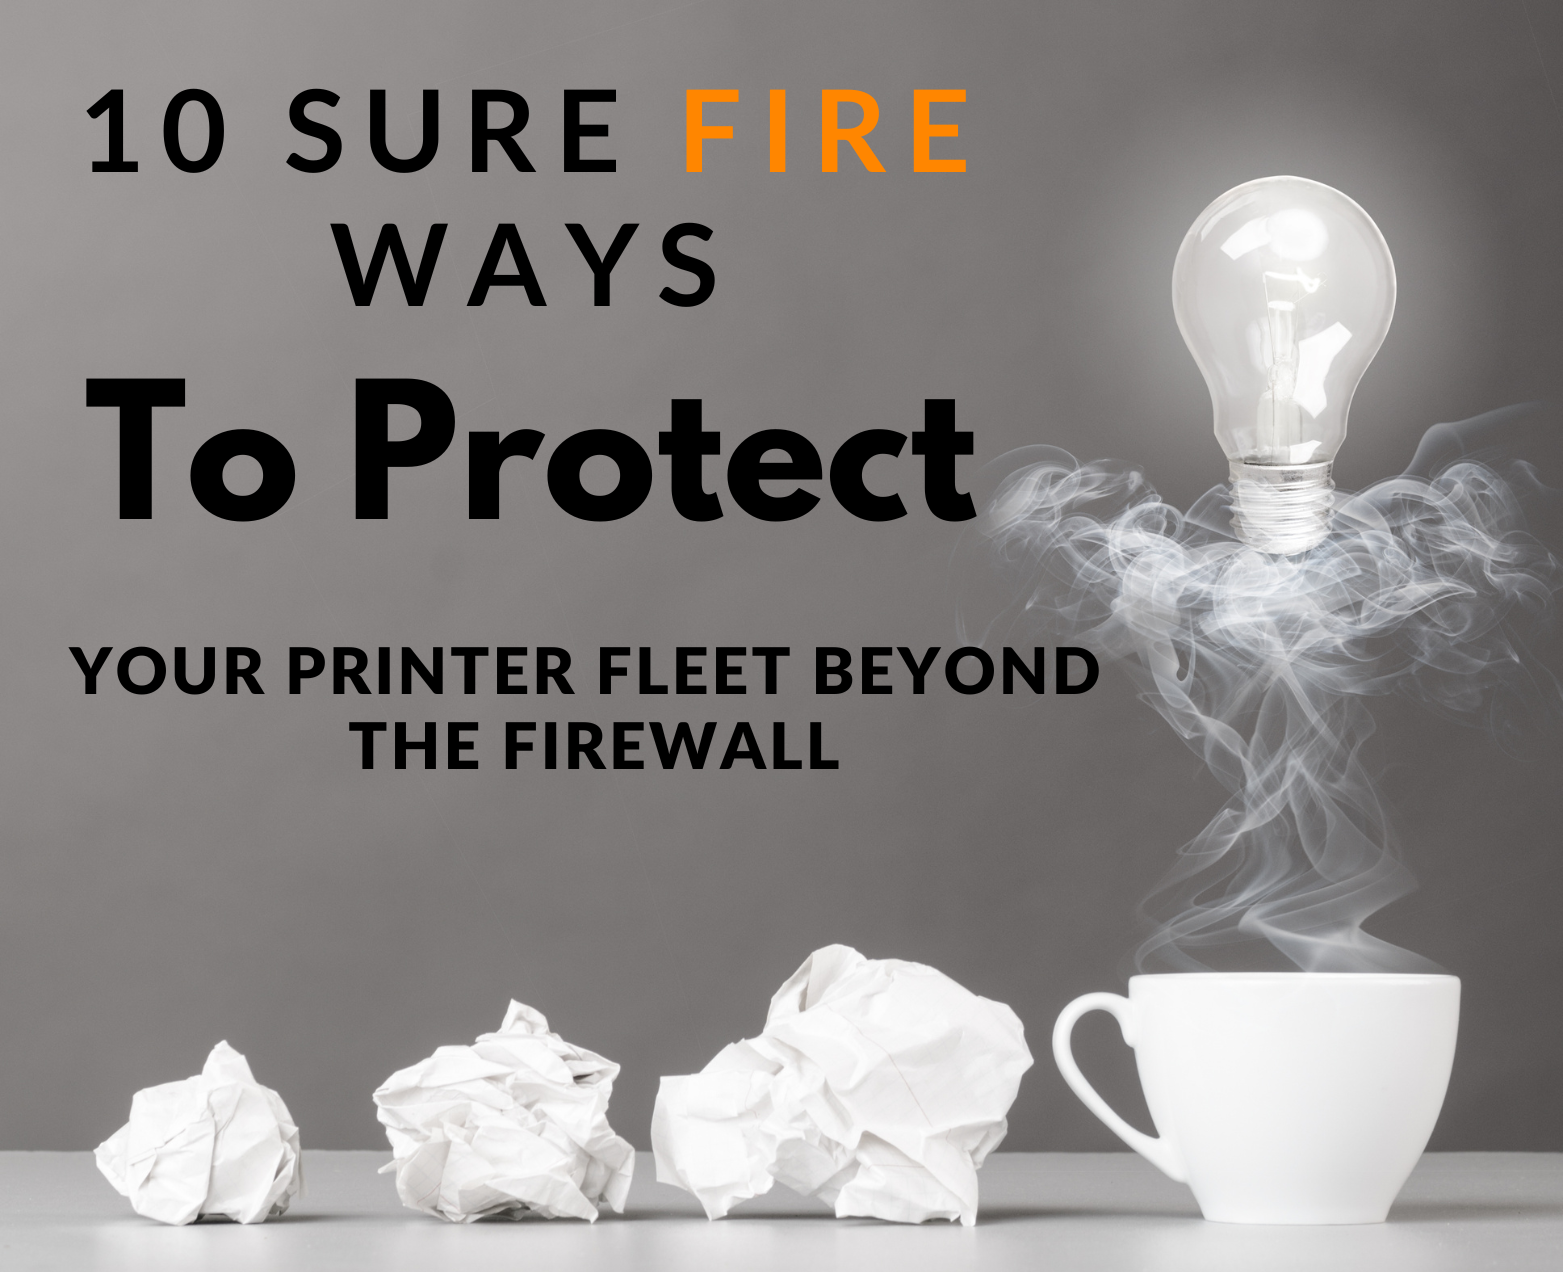 Text on gray background saying 10 Sure Fire Ways to Protect Your Printer Fleet Beyond the Firewall with crumpled paper and coffee cup with lightbulb.